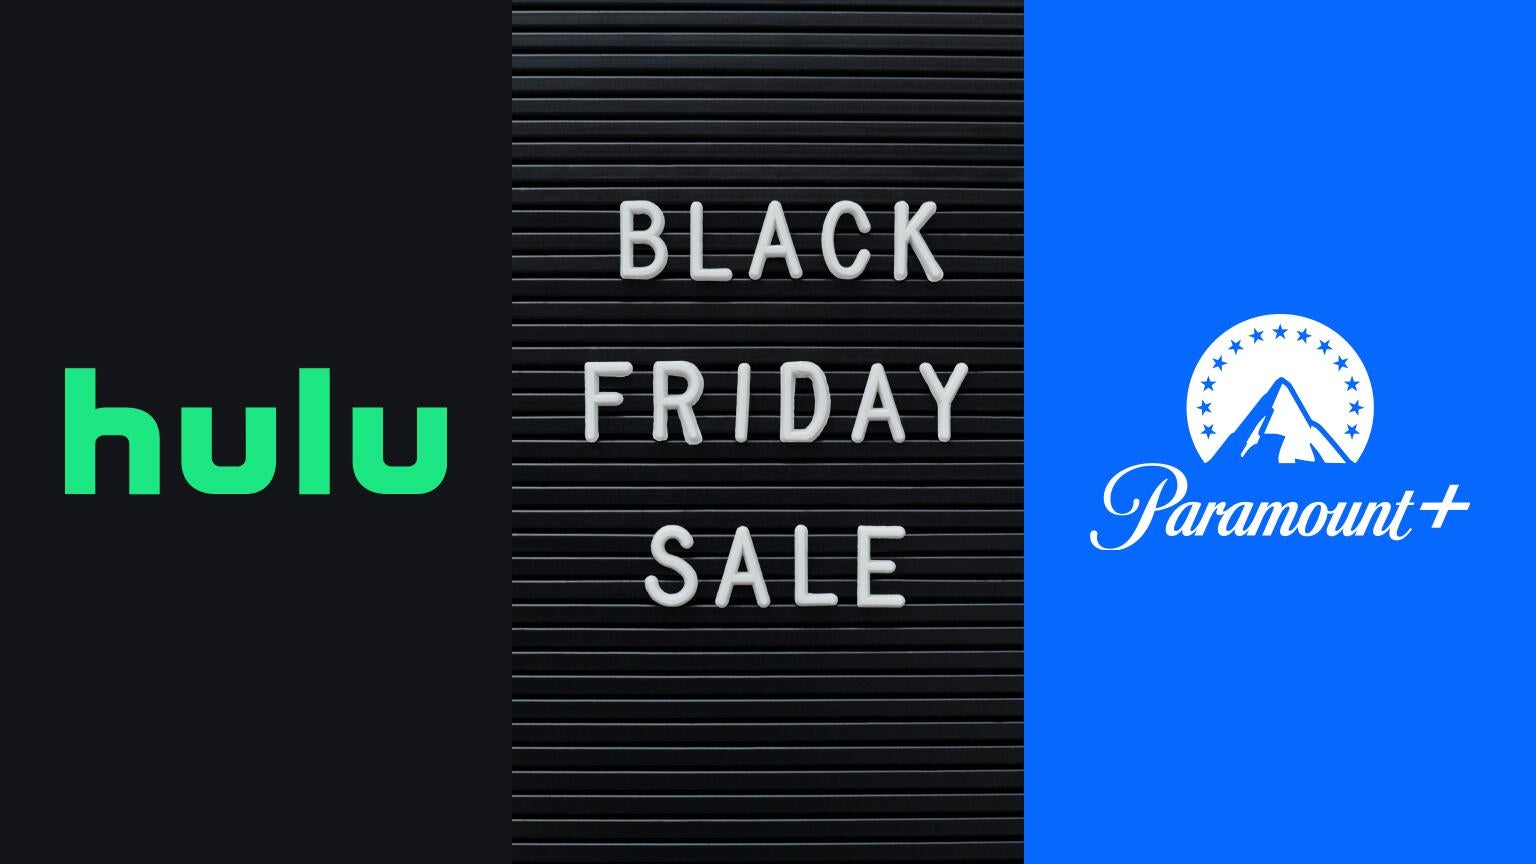 Prime Video Channels only $1.99/mo for Prime Members: Paramount+